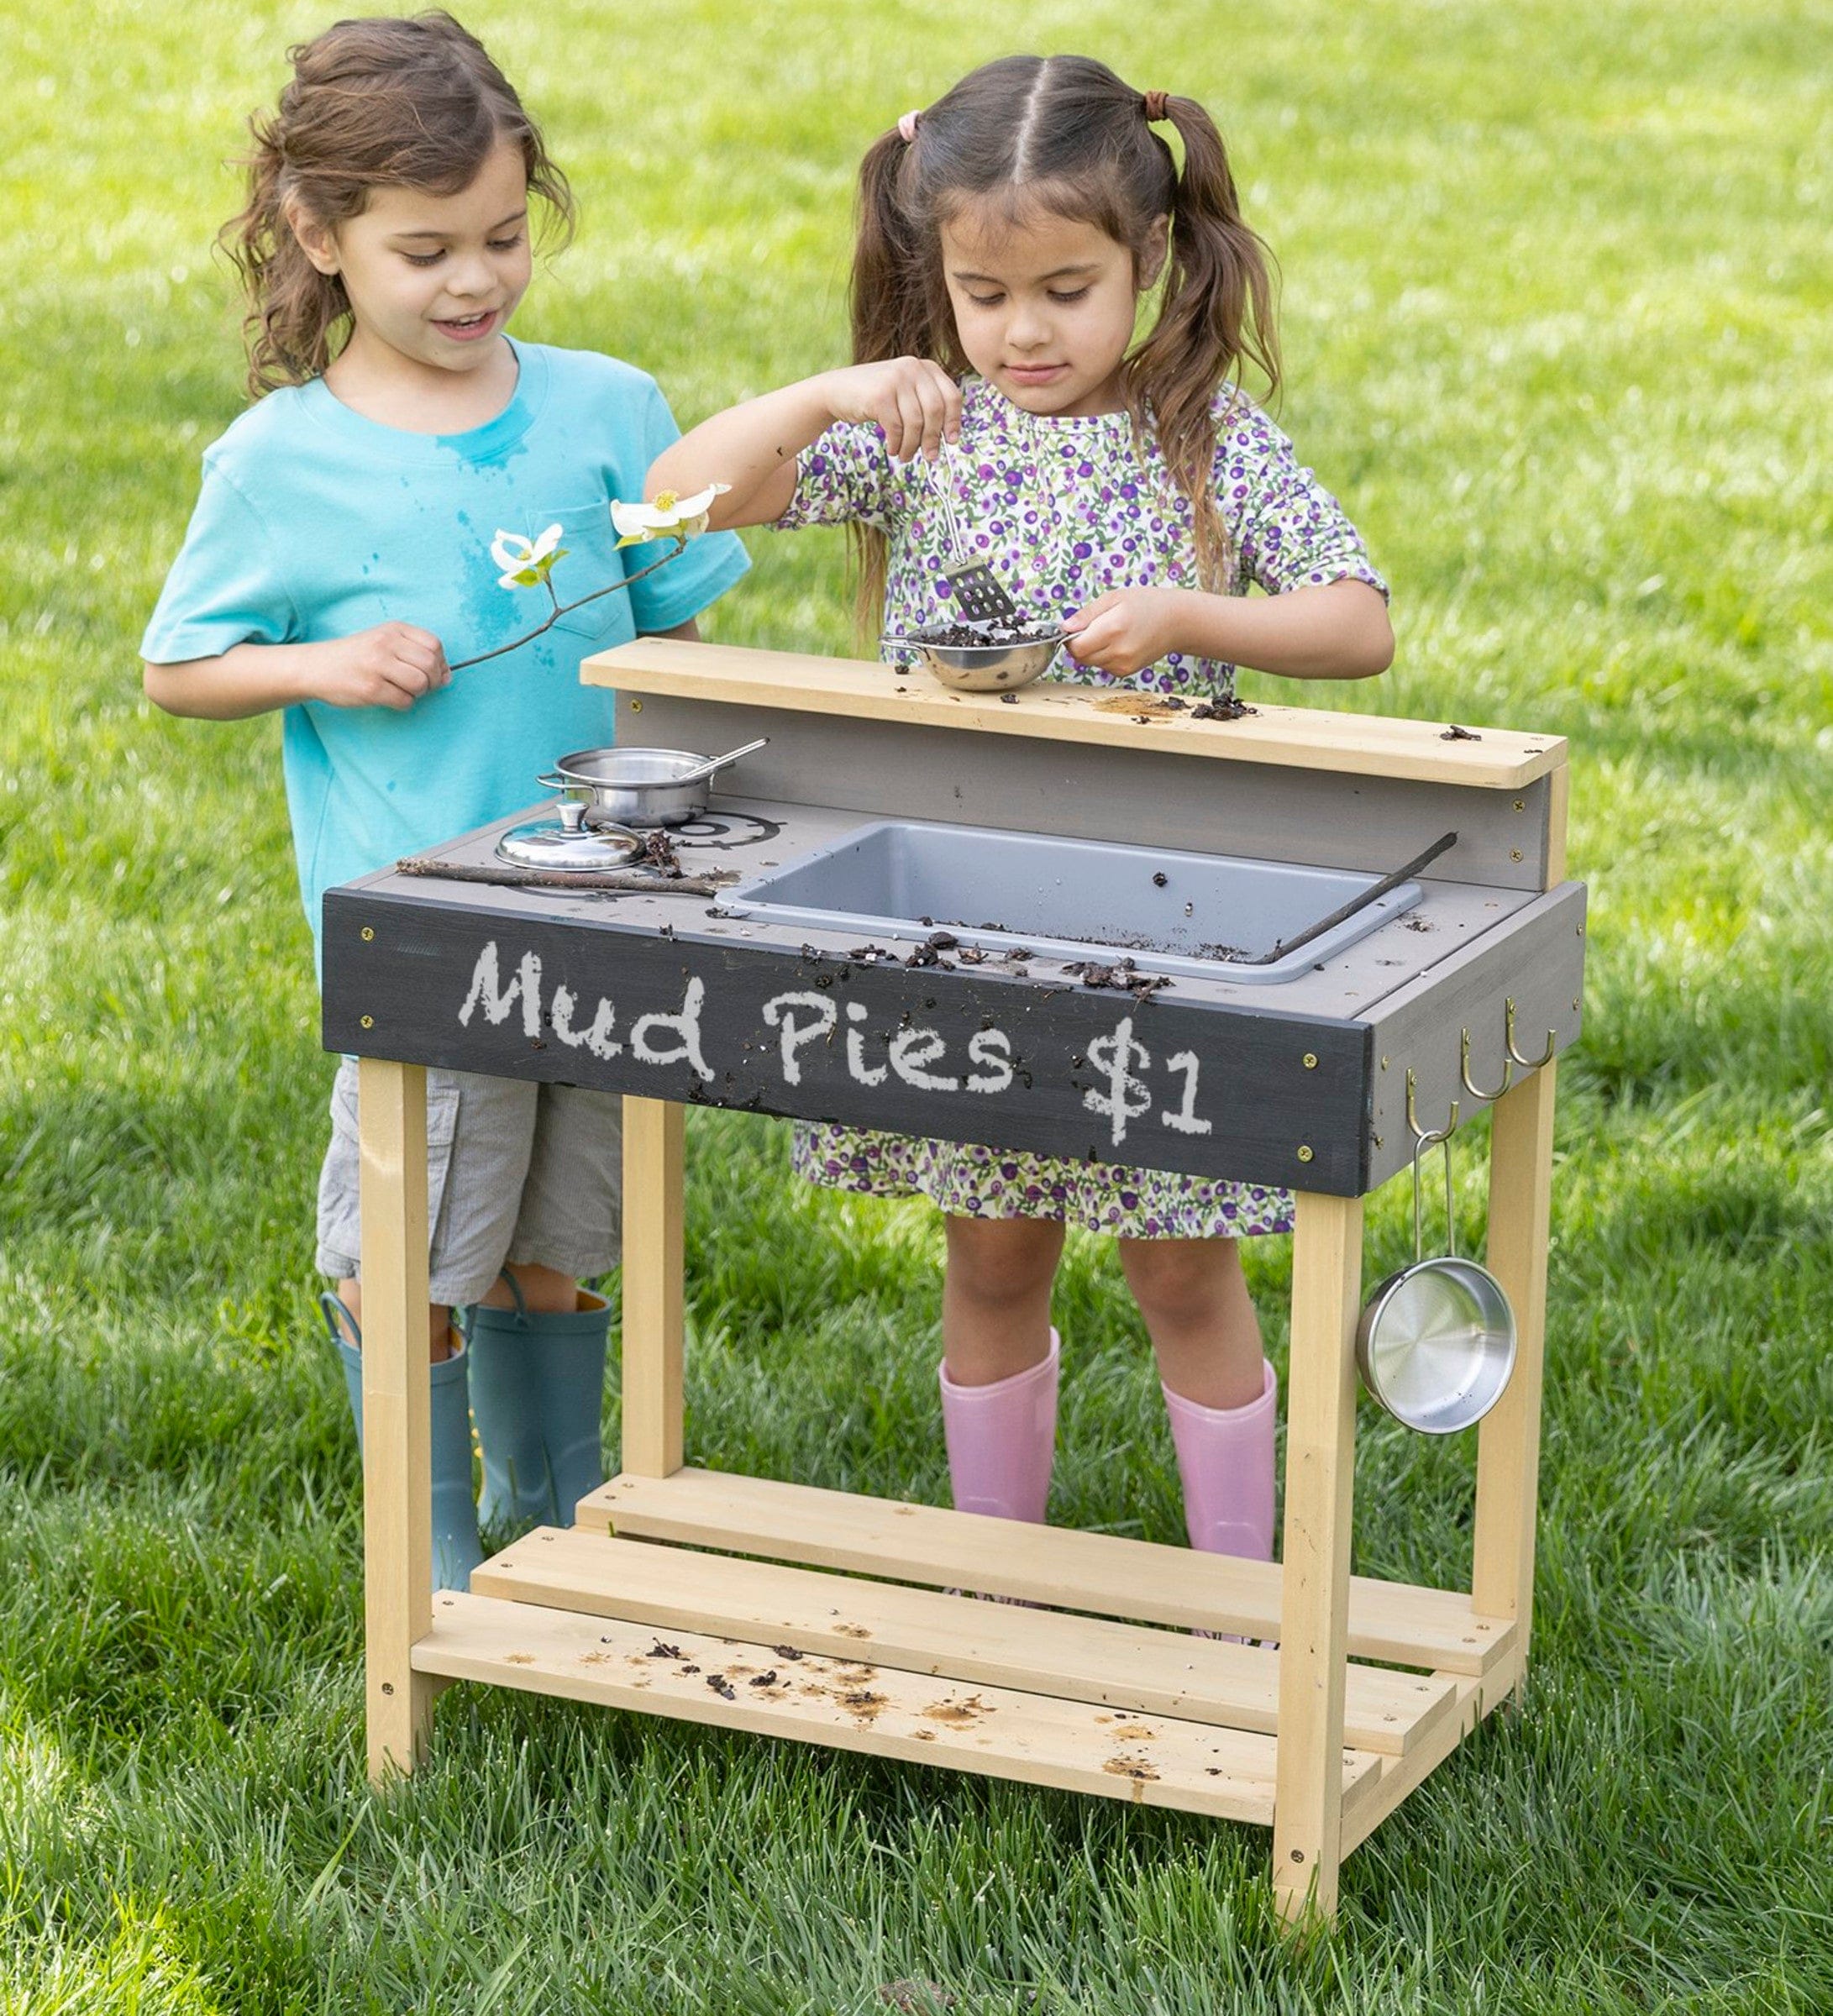 Jr. Chefs Wooden Mud Play Kitchen and Imagination Station with Metal Accessories